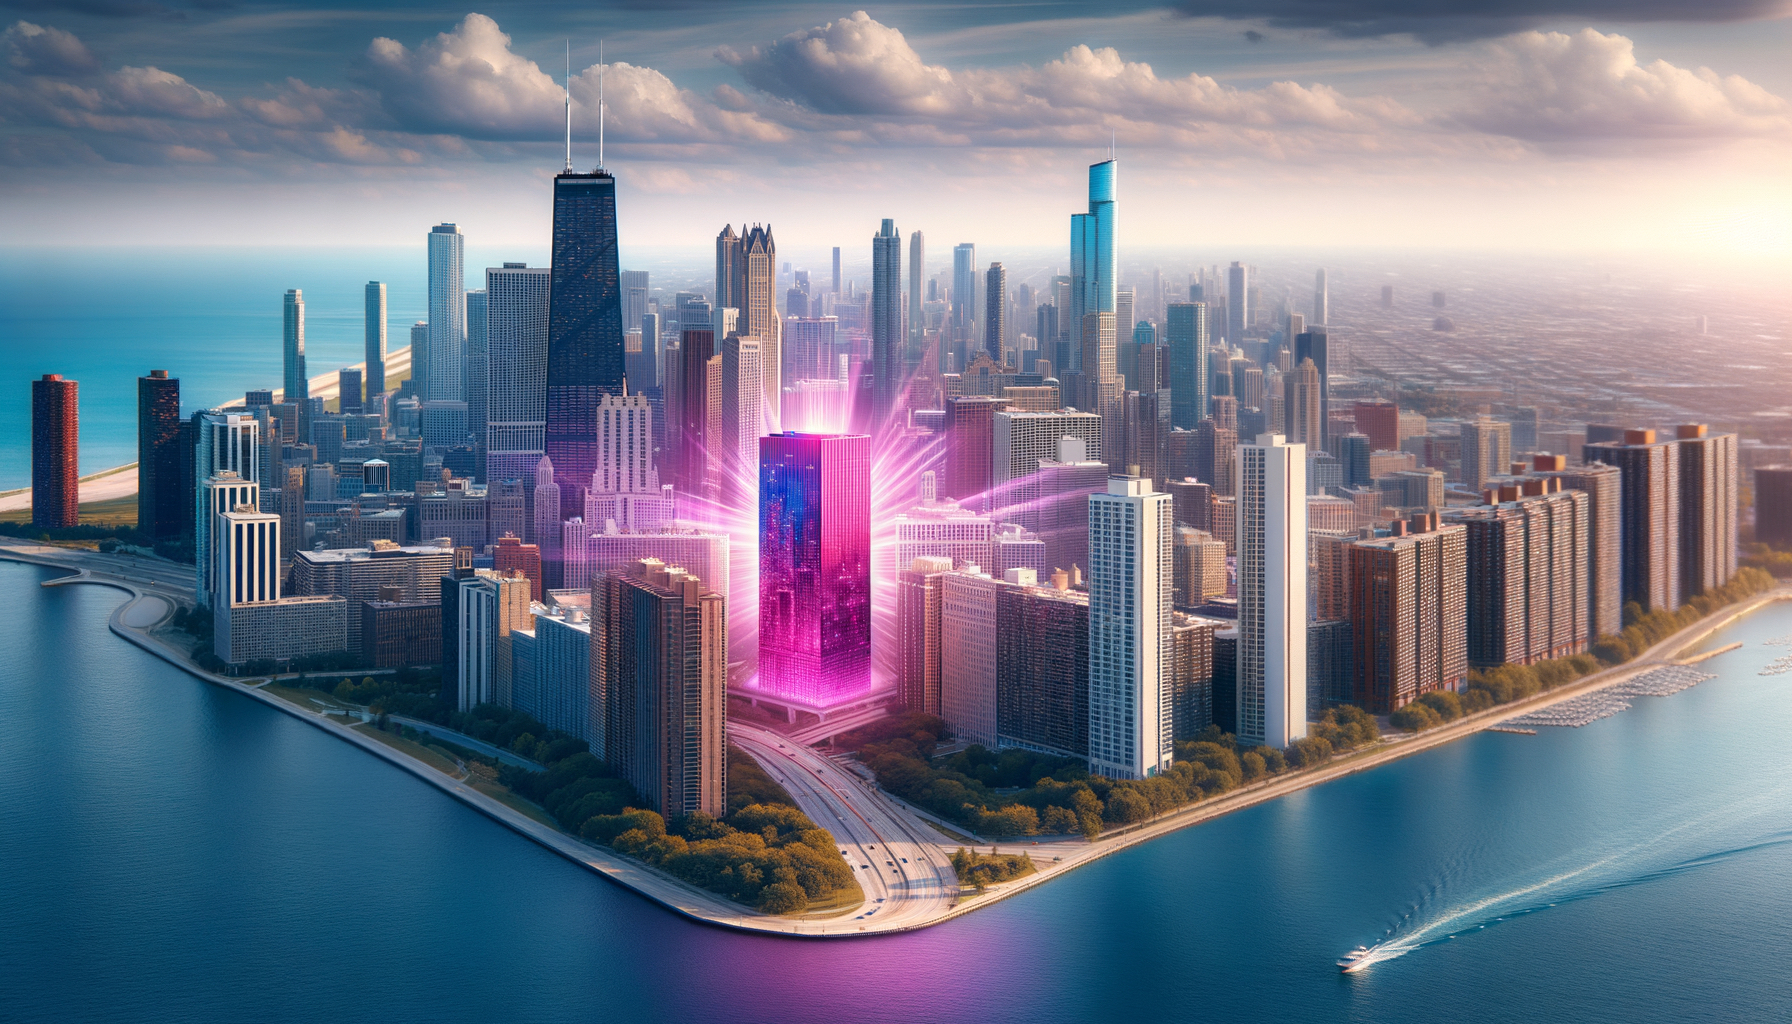 Illustrative hero image of the city Chicago, Illinois, highlighting a single building glowing with a fuschia aura.